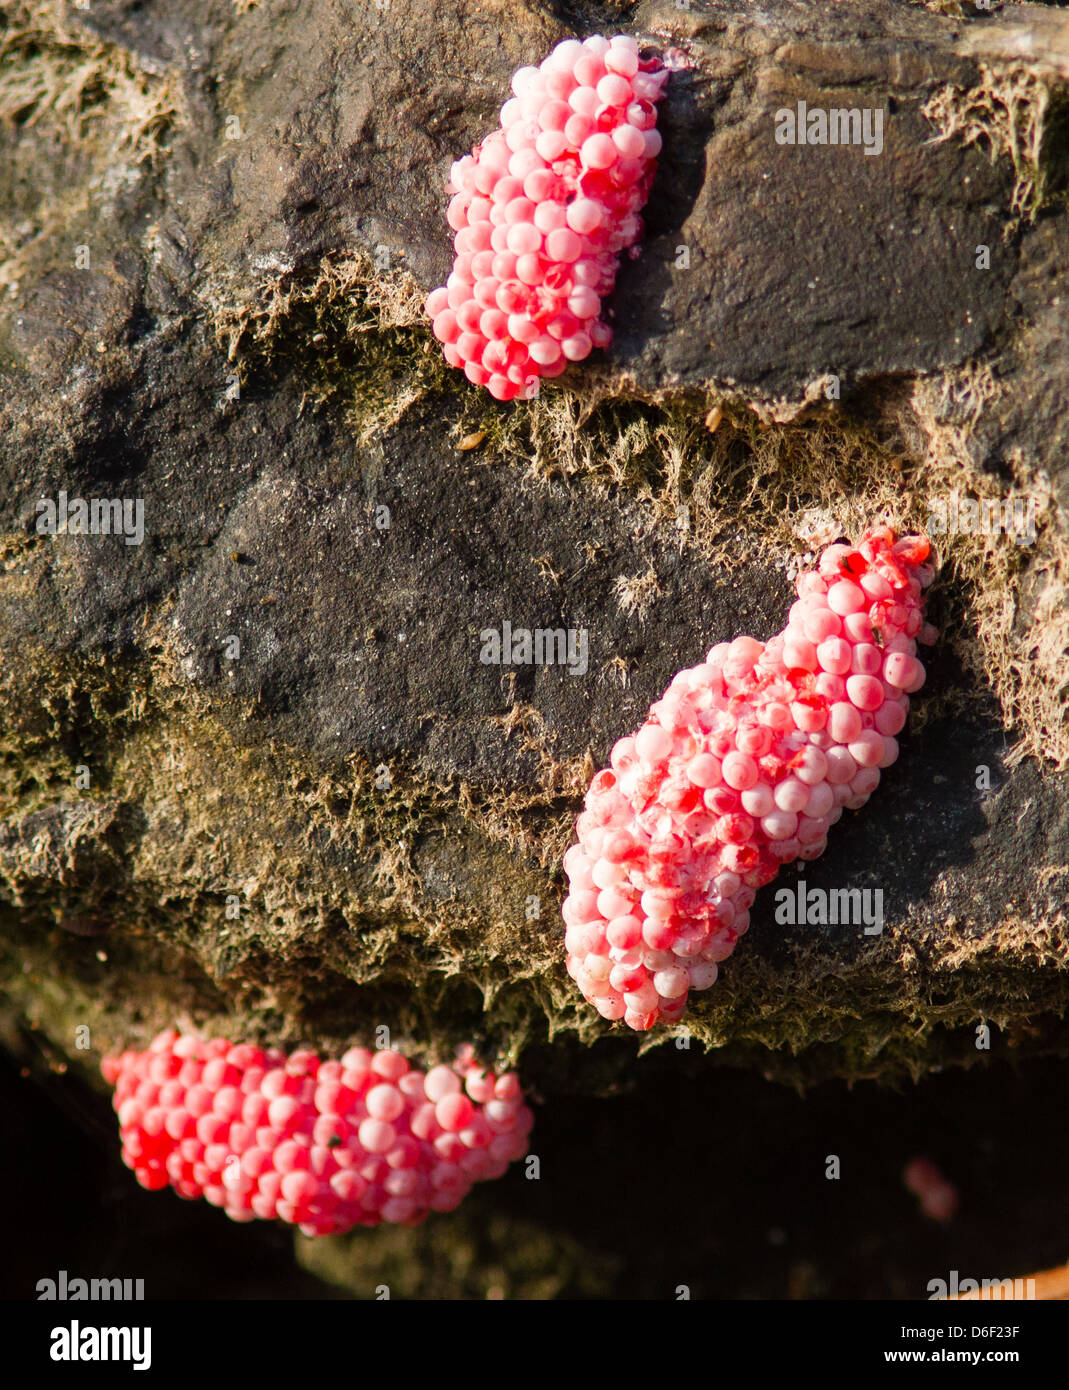 Pink eggs or spawn of a species of frog on stones around a pool in Sabah Malaysian Borneo Stock Photo